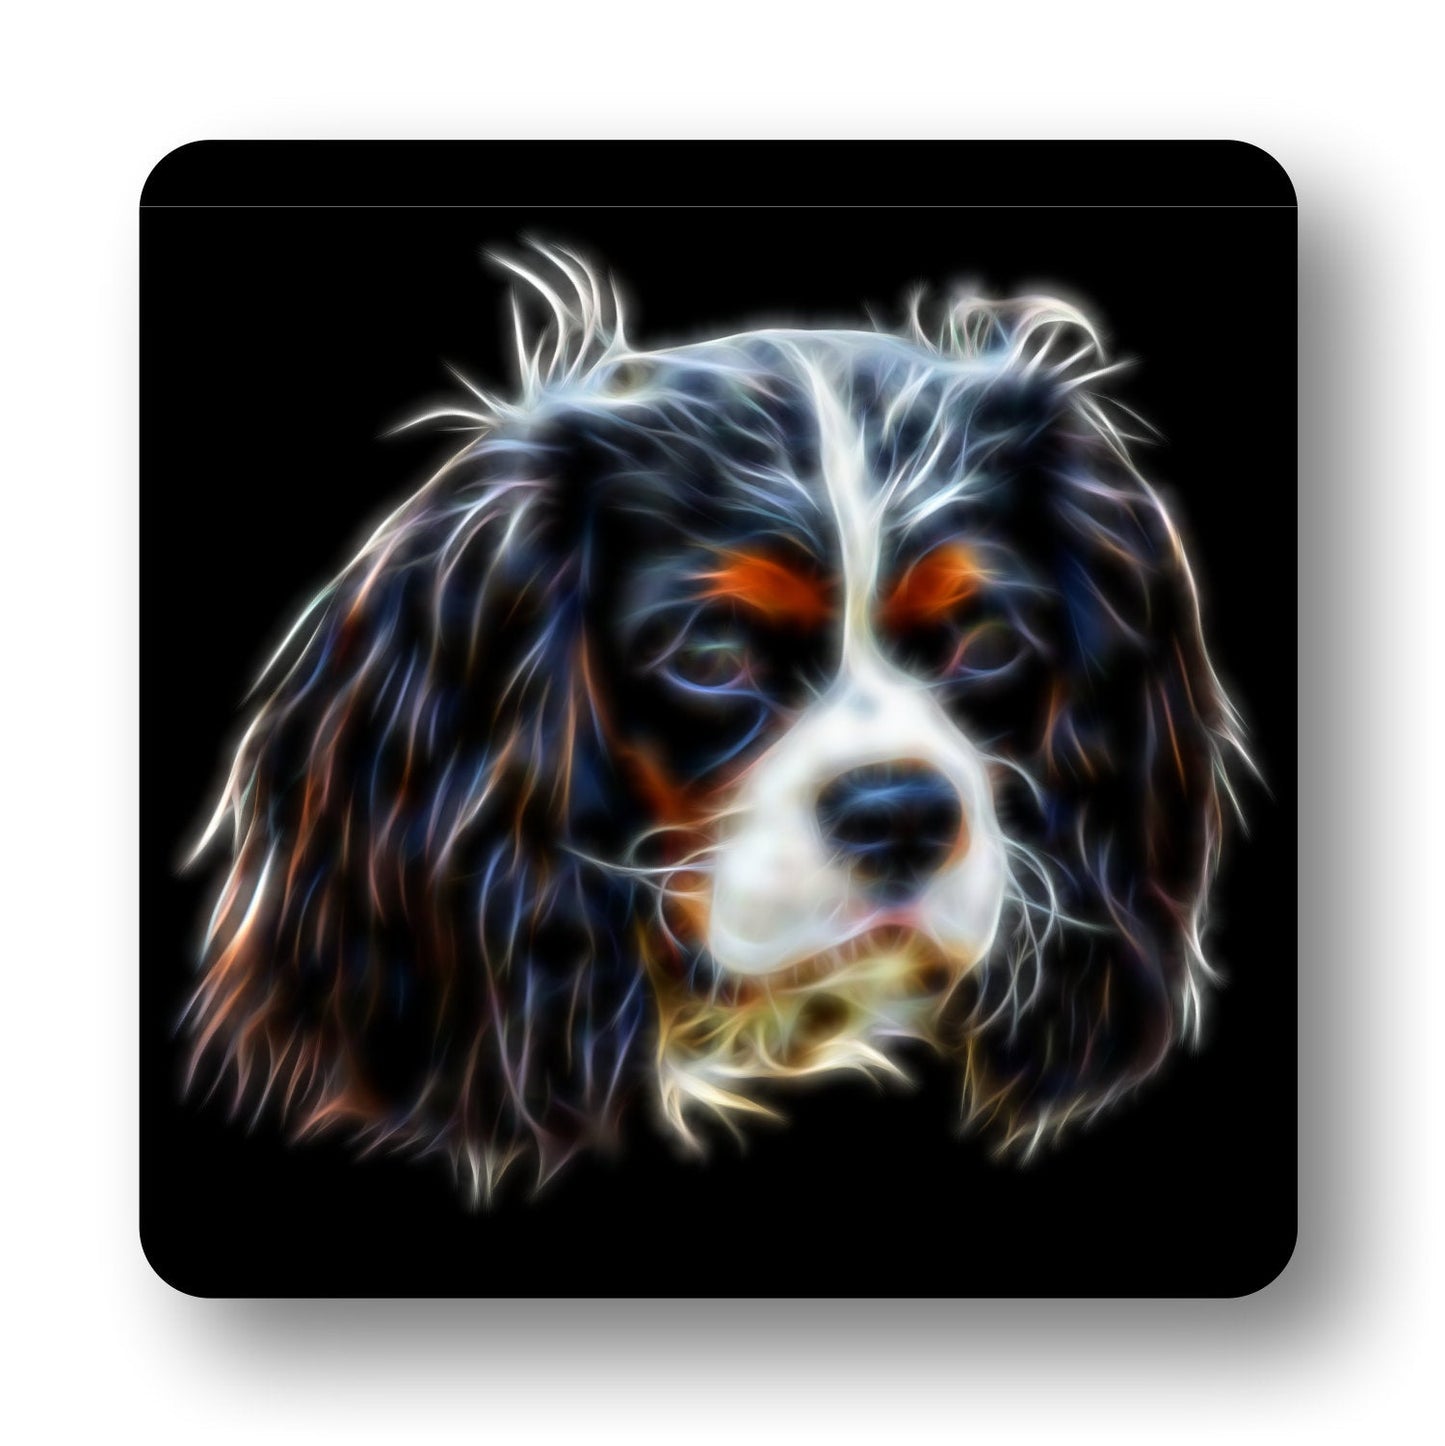 Tri Coloured King Charles Spaniel Metal Wall Plaque. Also available as Mouse Pad, Keychain or Coaster.